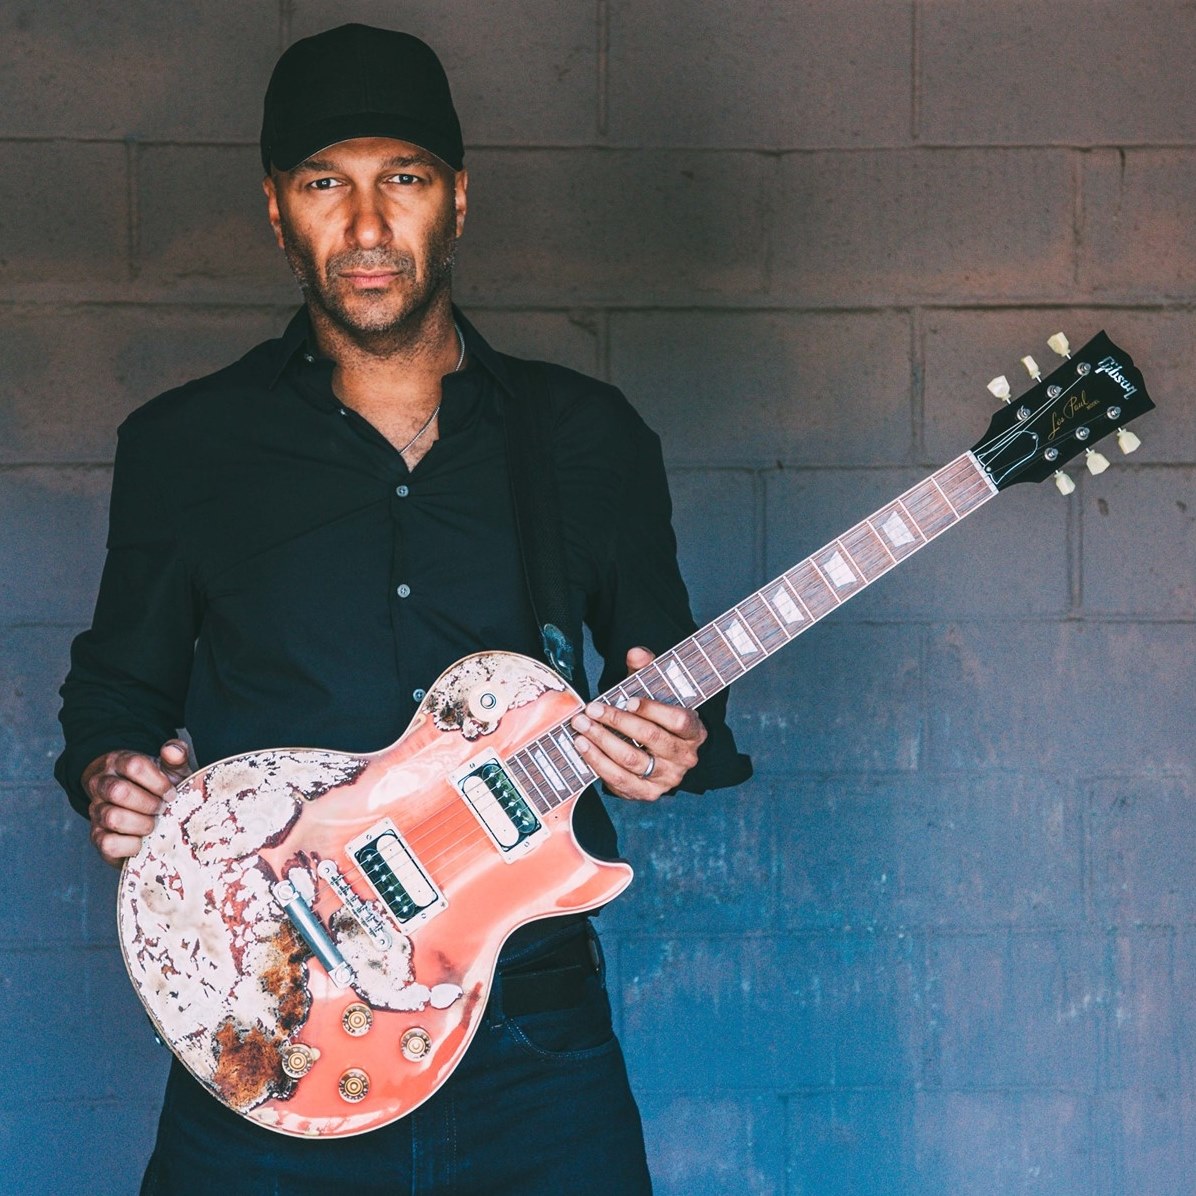 Tom Morello unveils new song “Every Step That I Take”